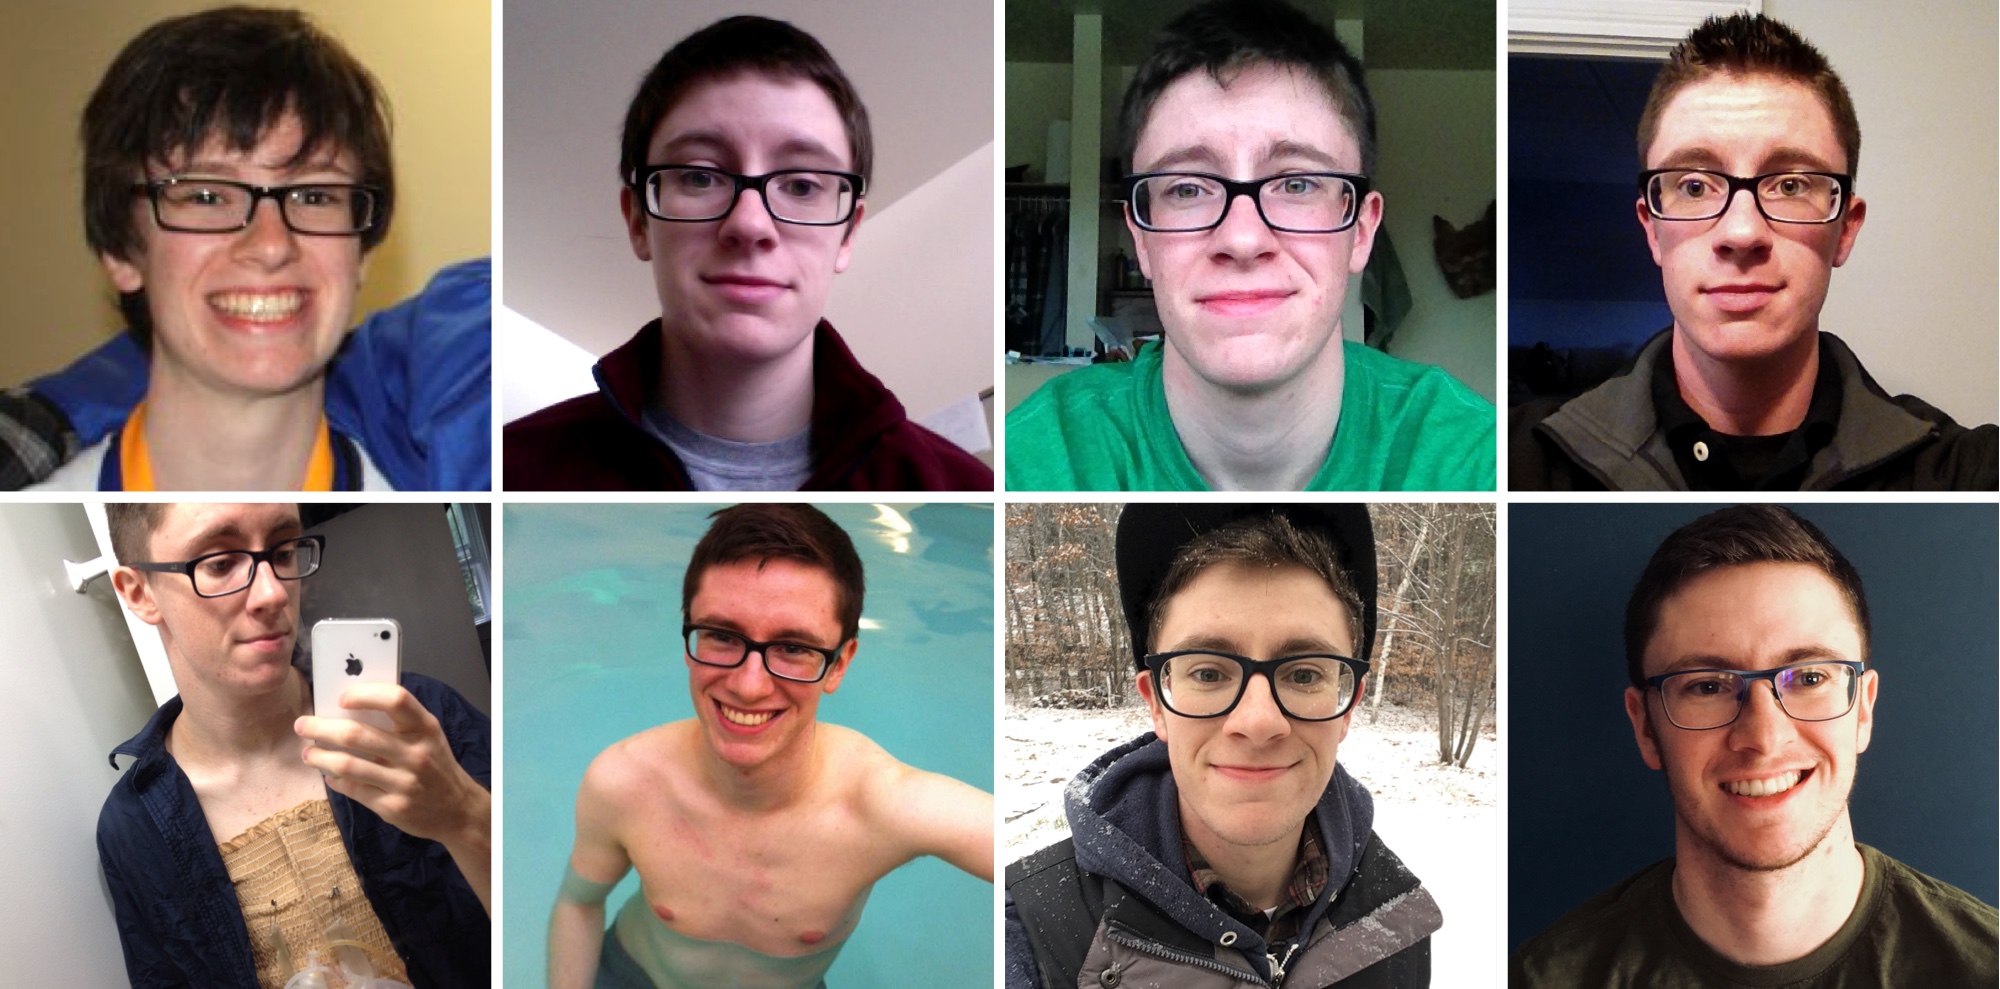 Photo series of Transcapsule founder, Tobey Tozier, throughout his transition journey.